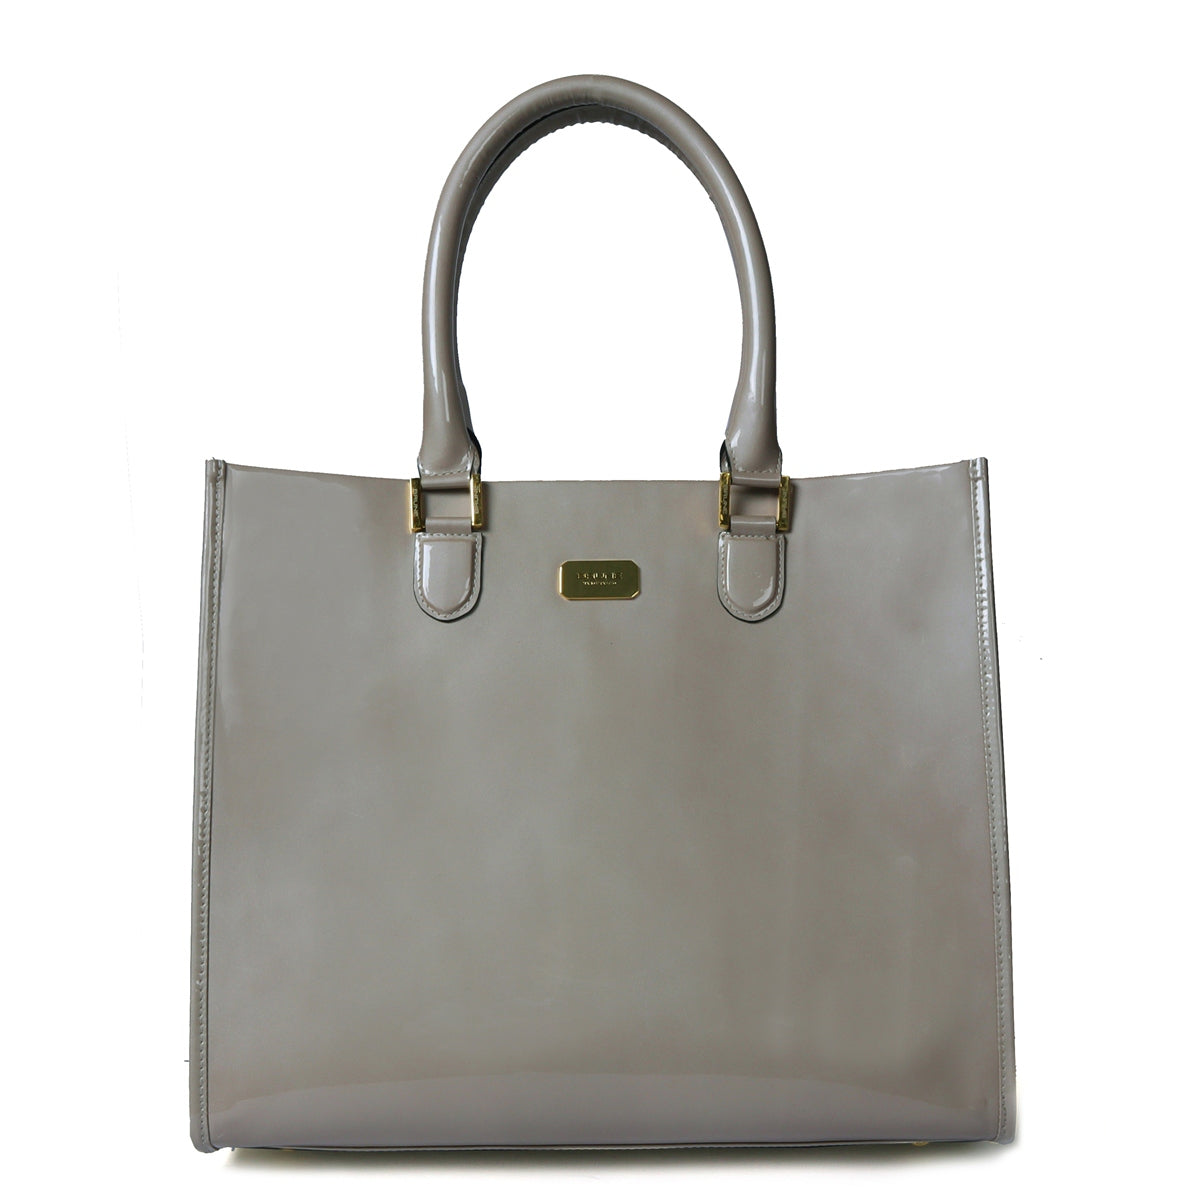 Large Beige Hand Bag In Square Shape with Patent Leather